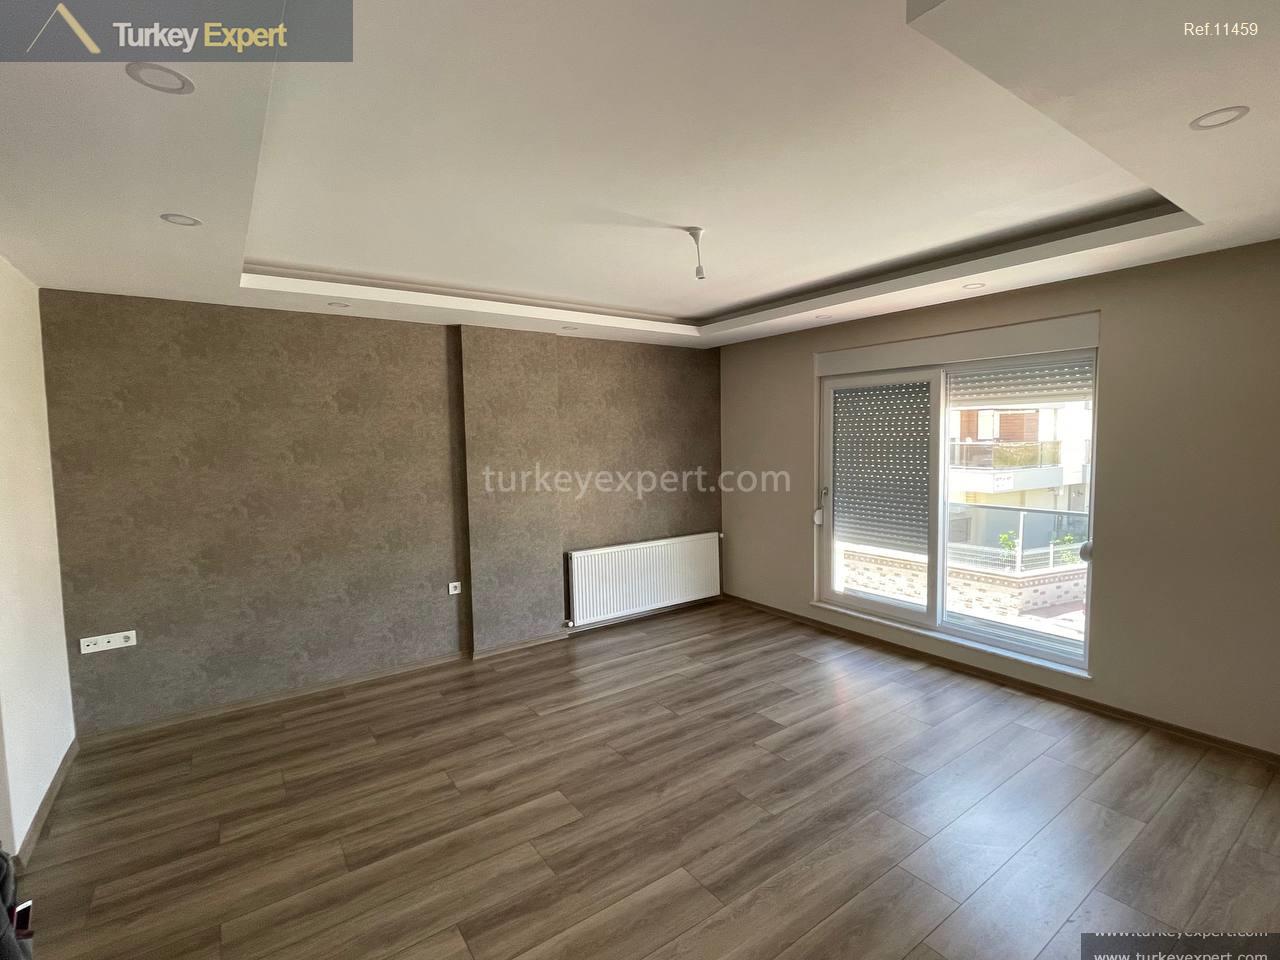 232bedroom apartments in a complex with a pool in antalya9_midpageimg_